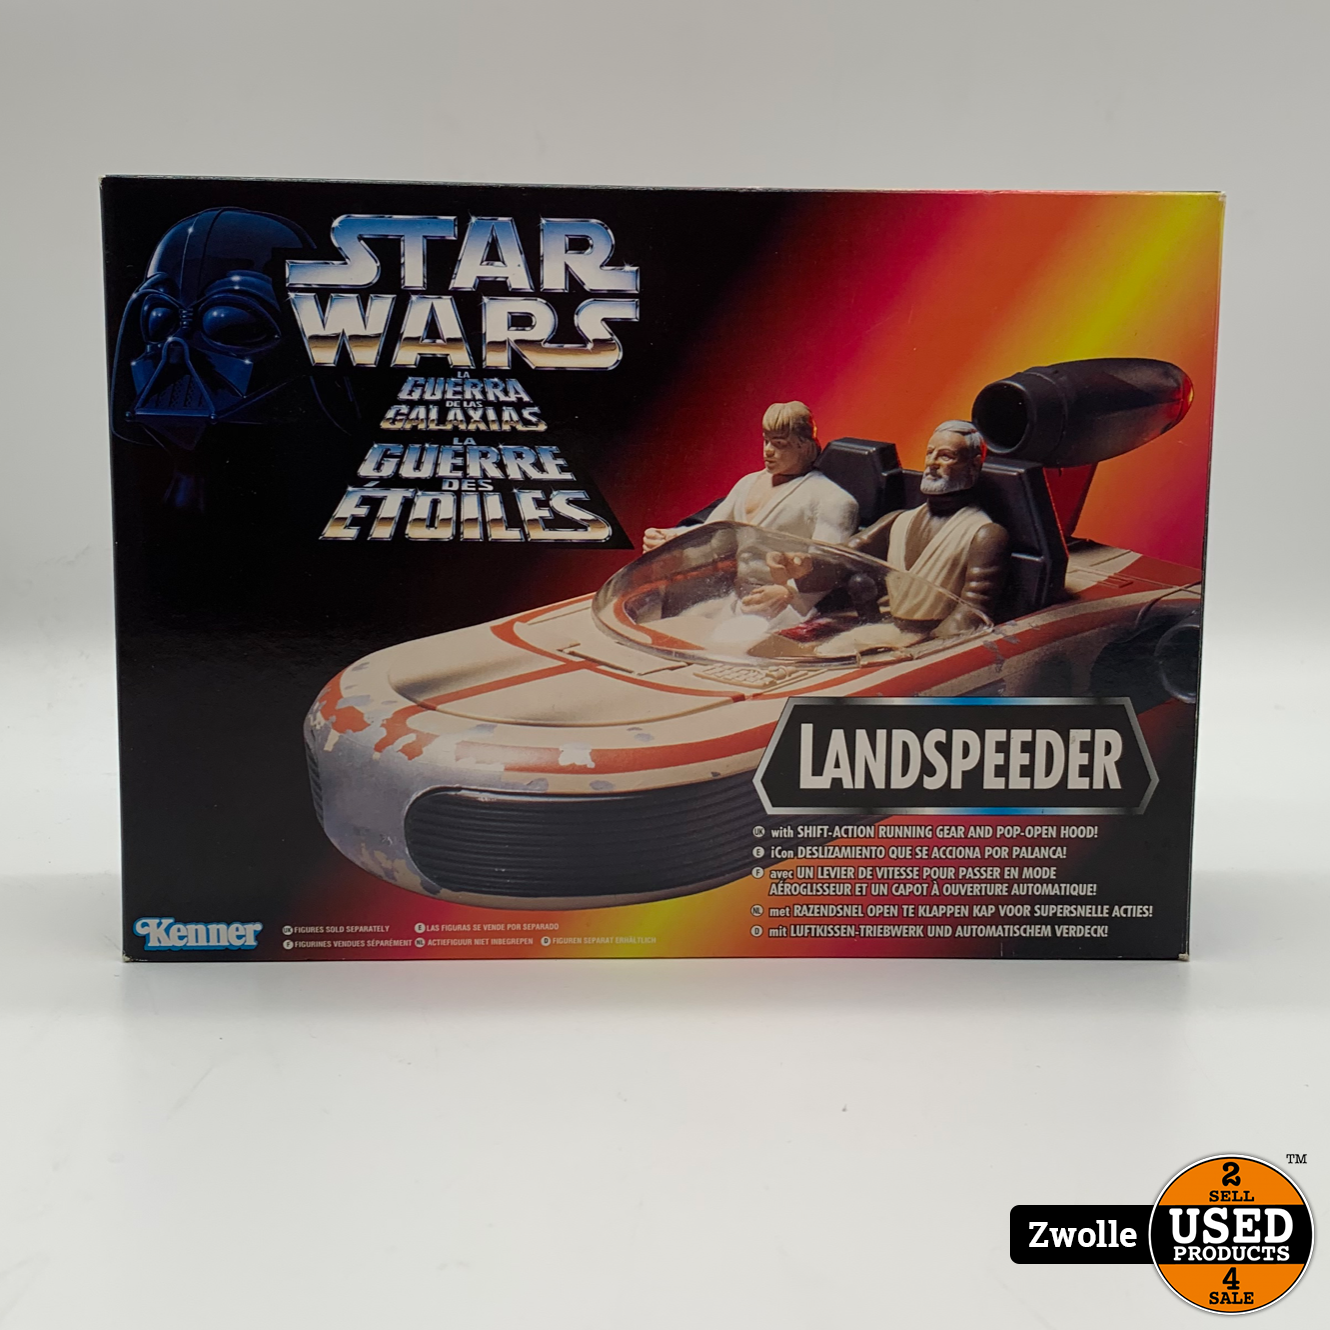 Star Wars | Red Edition Kenner 1995 - Used Products Zwolle